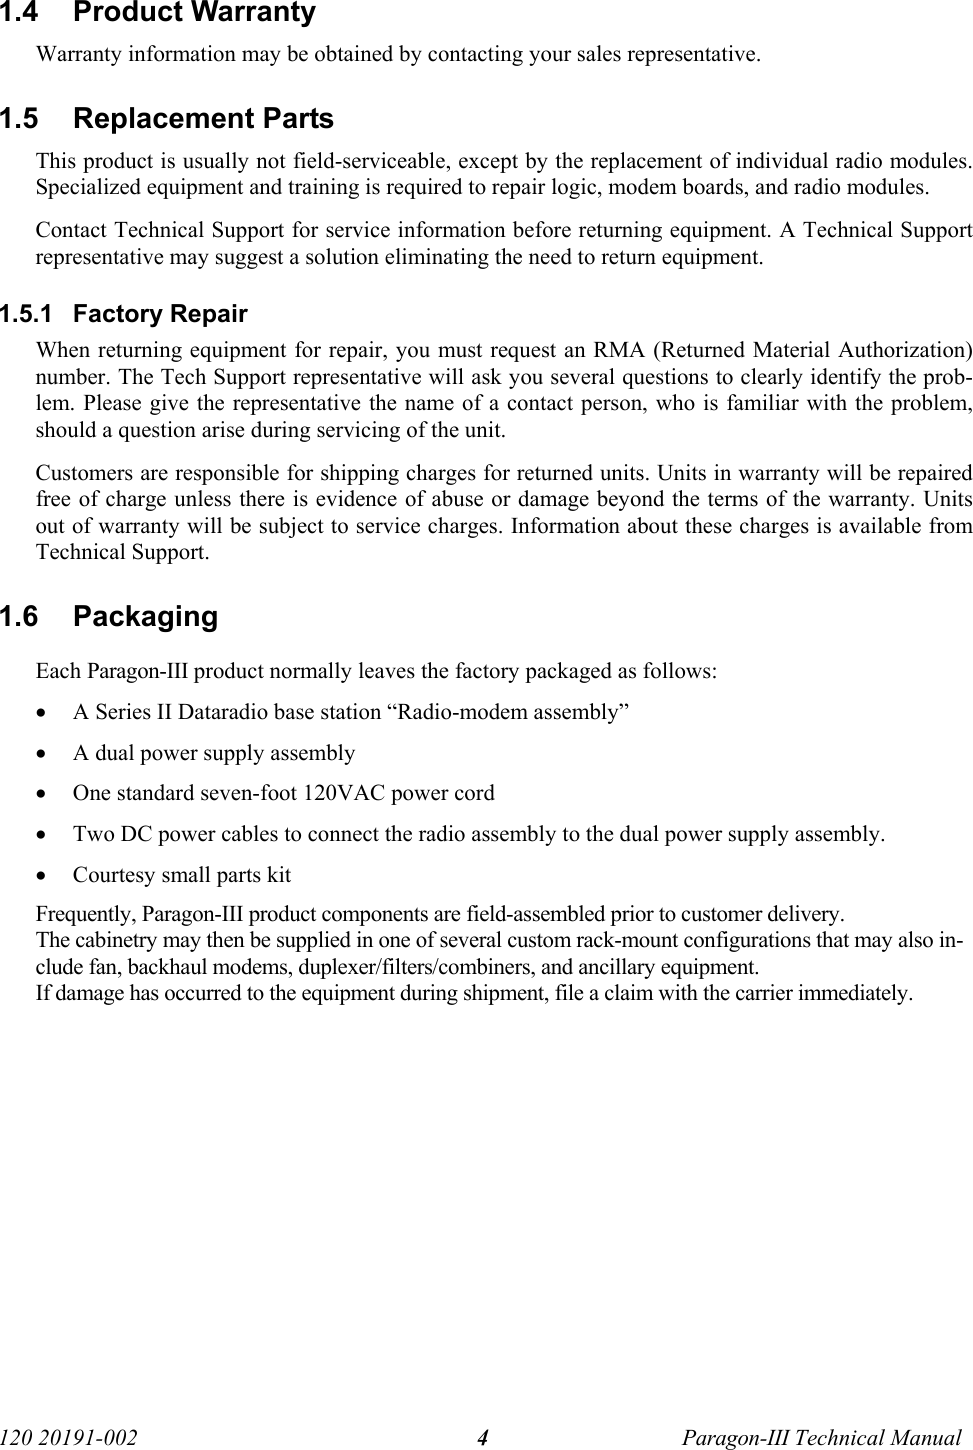   120 20191-002  Paragon-III Technical Manual 41.4 Product Warranty Warranty information may be obtained by contacting your sales representative. 1.5 Replacement Parts This product is usually not field-serviceable, except by the replacement of individual radio modules. Specialized equipment and training is required to repair logic, modem boards, and radio modules. Contact Technical Support for service information before returning equipment. A Technical Support representative may suggest a solution eliminating the need to return equipment. 1.5.1 Factory Repair When returning equipment for repair, you must request an RMA (Returned Material Authorization) number. The Tech Support representative will ask you several questions to clearly identify the prob-lem. Please give the representative the name of a contact person, who is familiar with the problem, should a question arise during servicing of the unit. Customers are responsible for shipping charges for returned units. Units in warranty will be repaired free of charge unless there is evidence of abuse or damage beyond the terms of the warranty. Units out of warranty will be subject to service charges. Information about these charges is available from Technical Support. 1.6 Packaging Each Paragon-III product normally leaves the factory packaged as follows: • A Series II Dataradio base station “Radio-modem assembly”  • A dual power supply assembly • One standard seven-foot 120VAC power cord  • Two DC power cables to connect the radio assembly to the dual power supply assembly.  • Courtesy small parts kit Frequently, Paragon-III product components are field-assembled prior to customer delivery.  The cabinetry may then be supplied in one of several custom rack-mount configurations that may also in-clude fan, backhaul modems, duplexer/filters/combiners, and ancillary equipment.  If damage has occurred to the equipment during shipment, file a claim with the carrier immediately. 